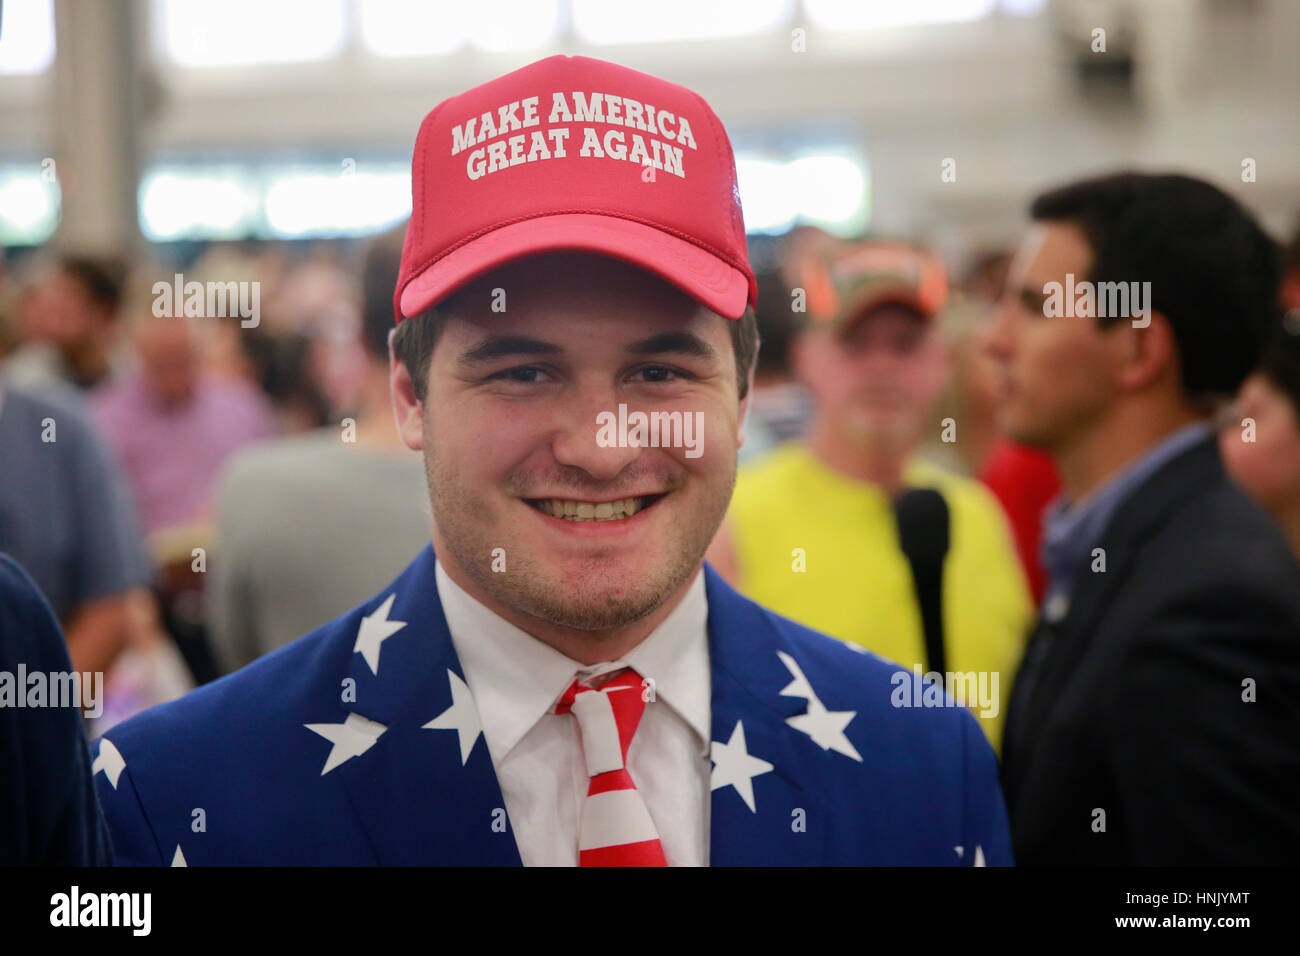 A Trump supporter wears a hat reading, 'Make America Great Again,' before the presidential campaign rally for Donald Trump at the Indiana State Fairgrounds during the Indiana primary in 2016. Donald Trump went on to win the Indiana primary, and the presidency. Stock Photo